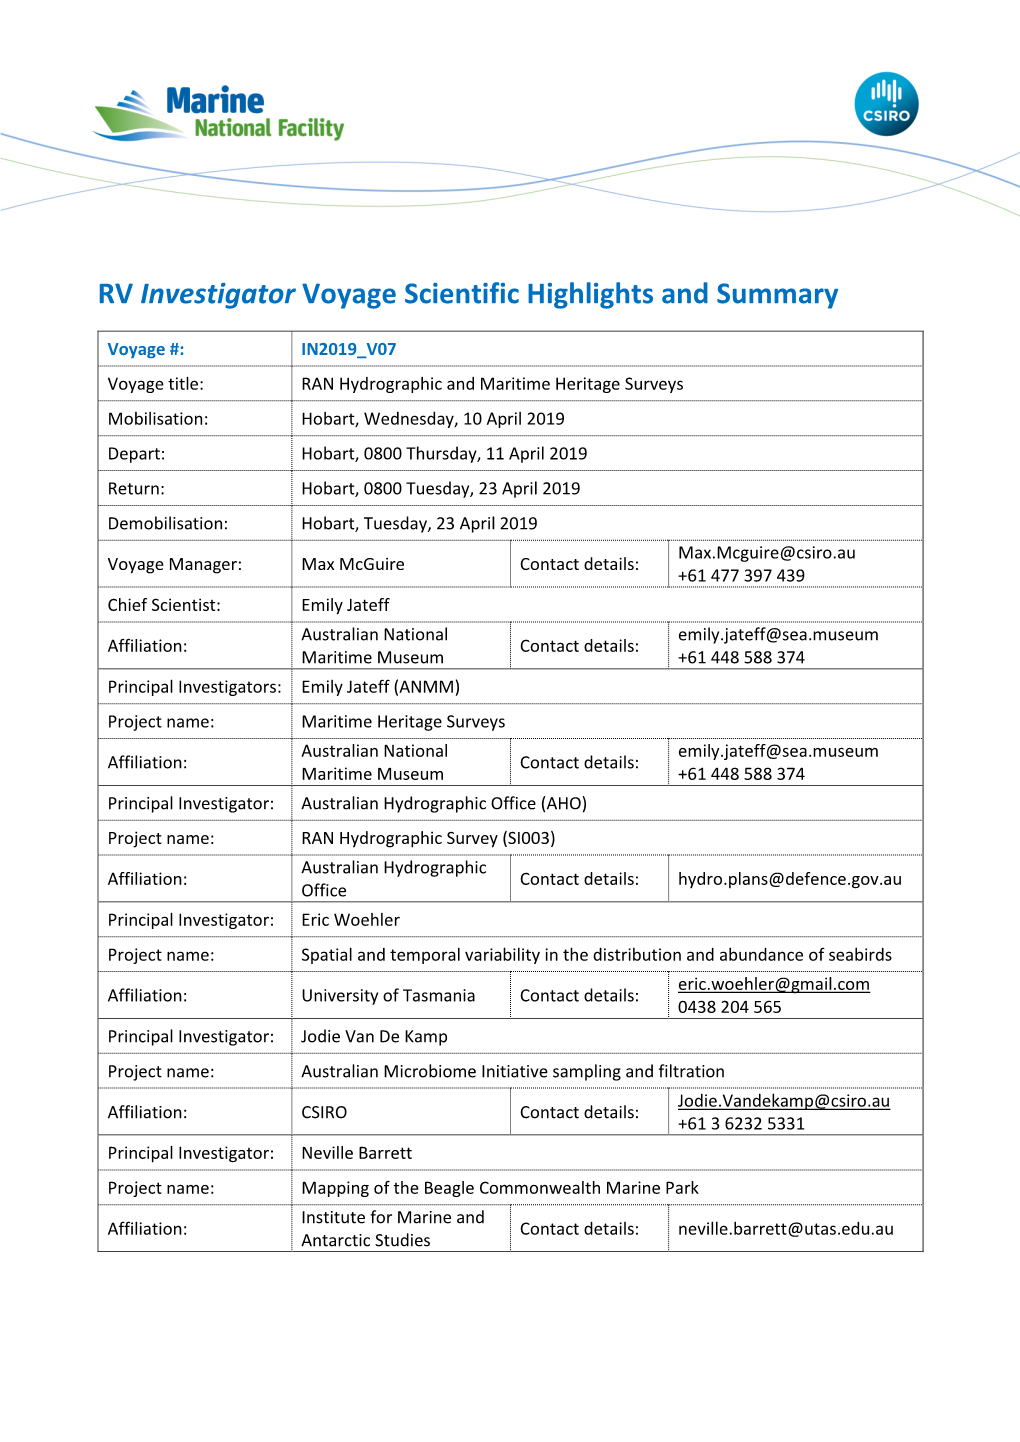 Voyage Scientific Highlights and Summary Template